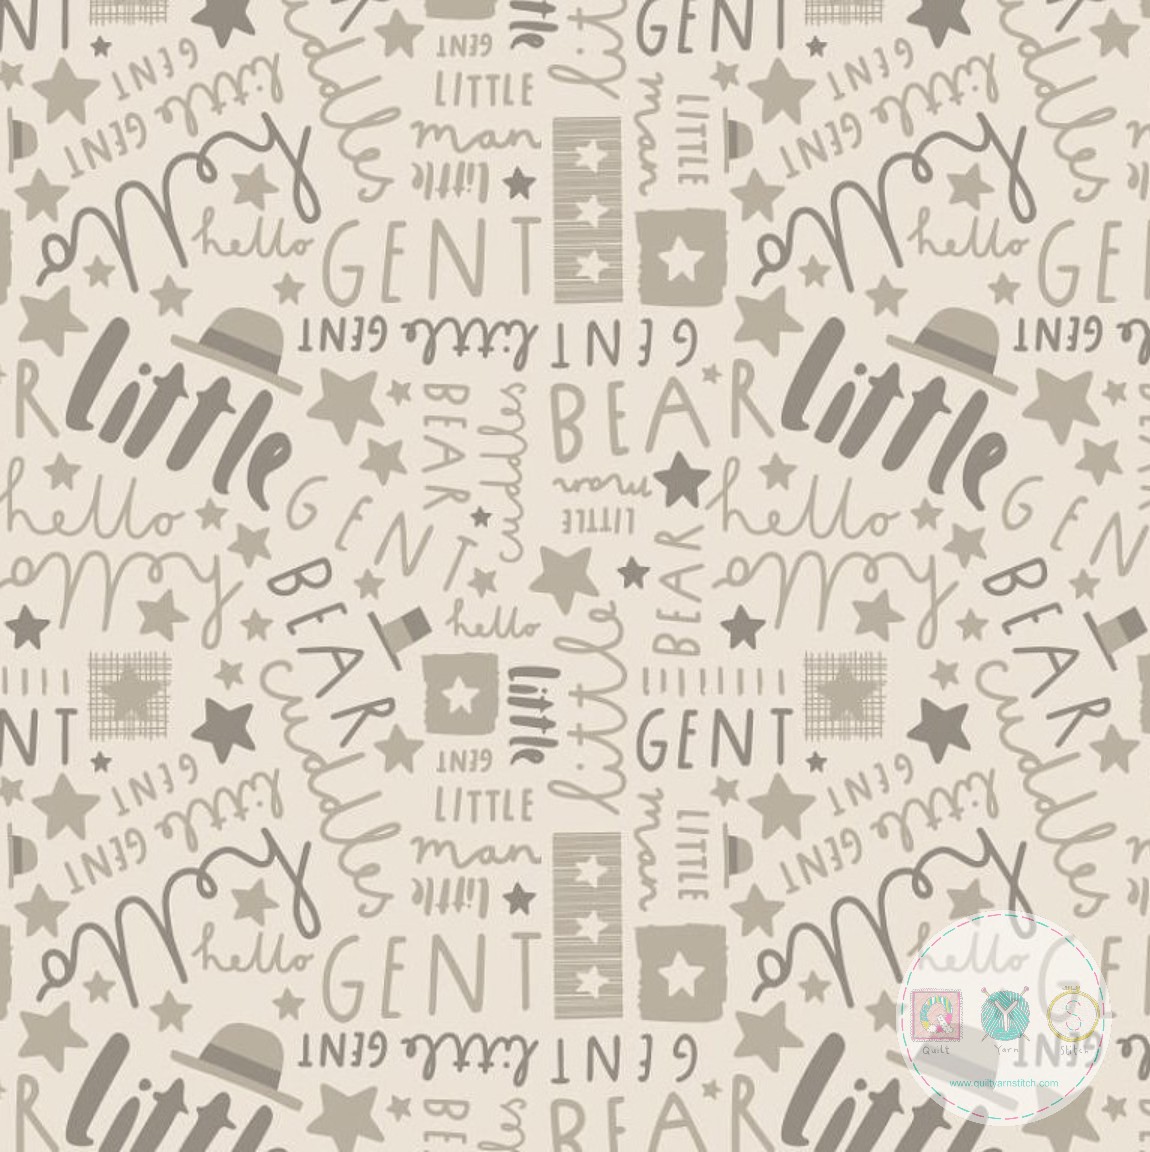 Quilting Fabric - Little Gent from Big Bear Cuddles by Camelot Fabrics 21185503